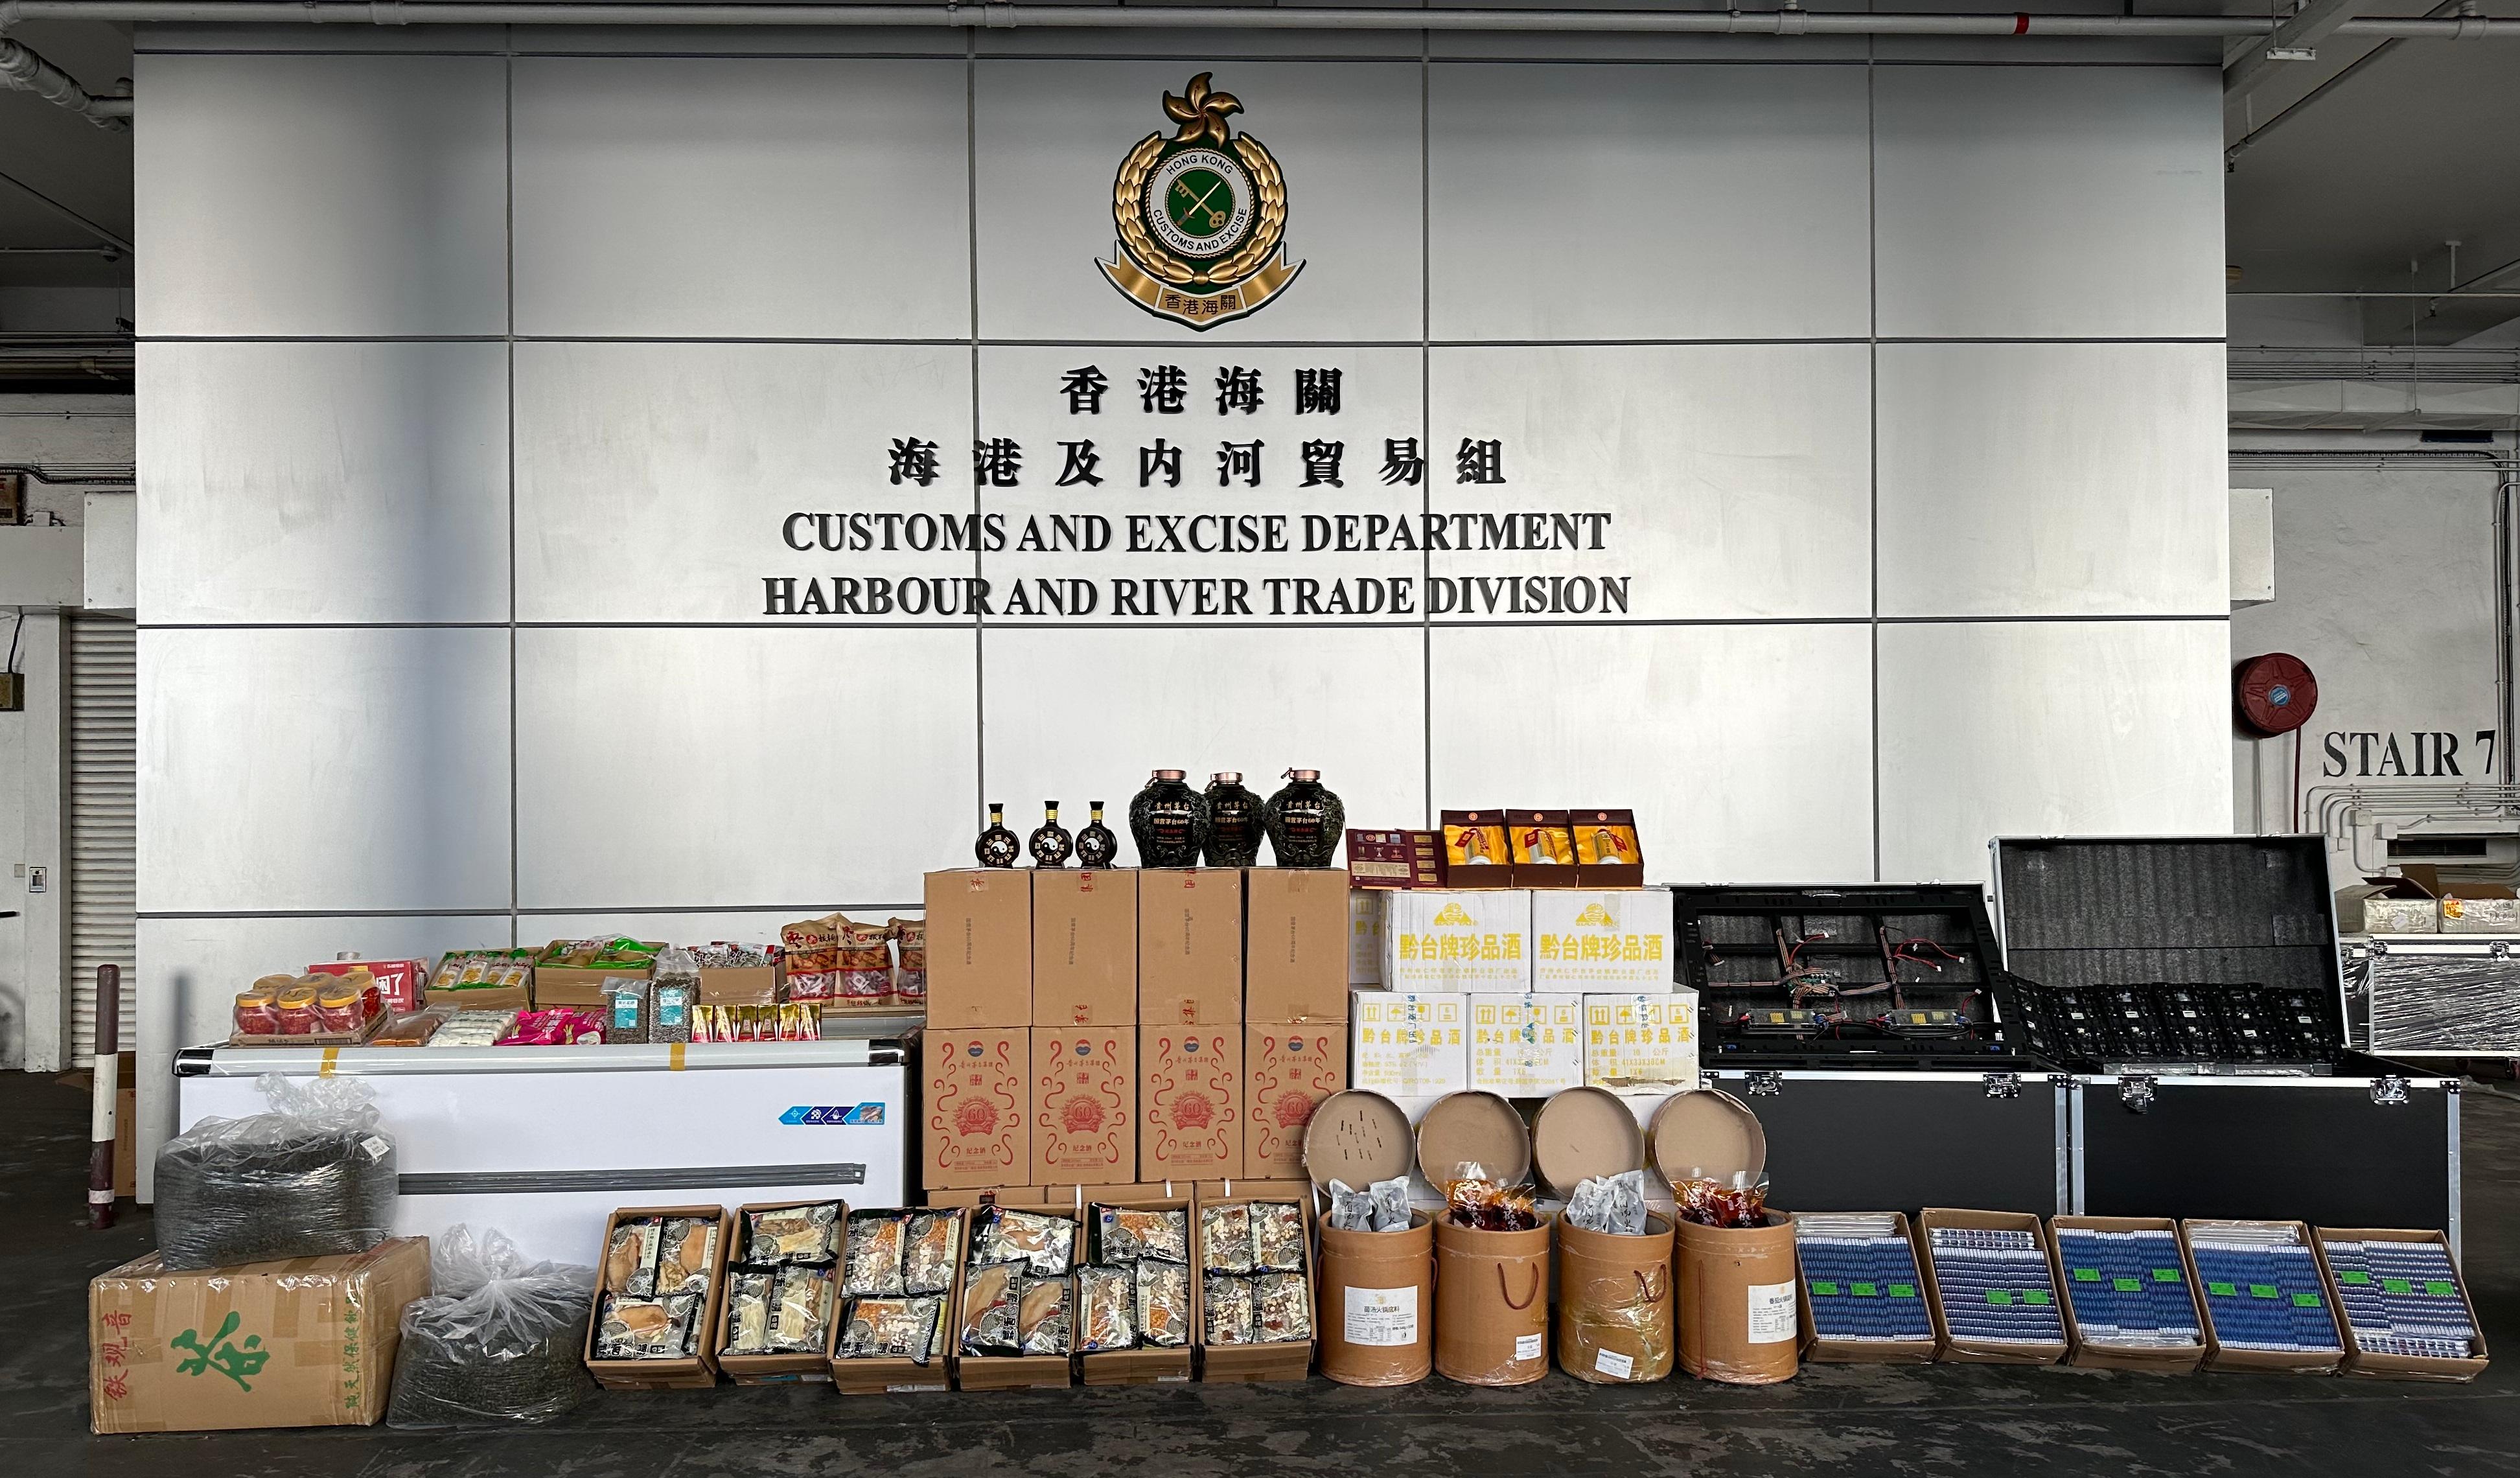 Hong Kong Customs on November 18 seized about 710 bottles of suspected smuggled liquor with a total volume of about 490 litres at the Tuen Mun River Trade Terminal Customs Cargo Examination Compound. The estimated market value and the duty potential were $4.6 million and $2.3 million approximately. In addition, Customs officers at the same time seized a batch of suspected smuggled goods with an estimated market value of about $160,000. Photo shows some of the suspected smuggled liquor and other suspected smuggled goods seized.